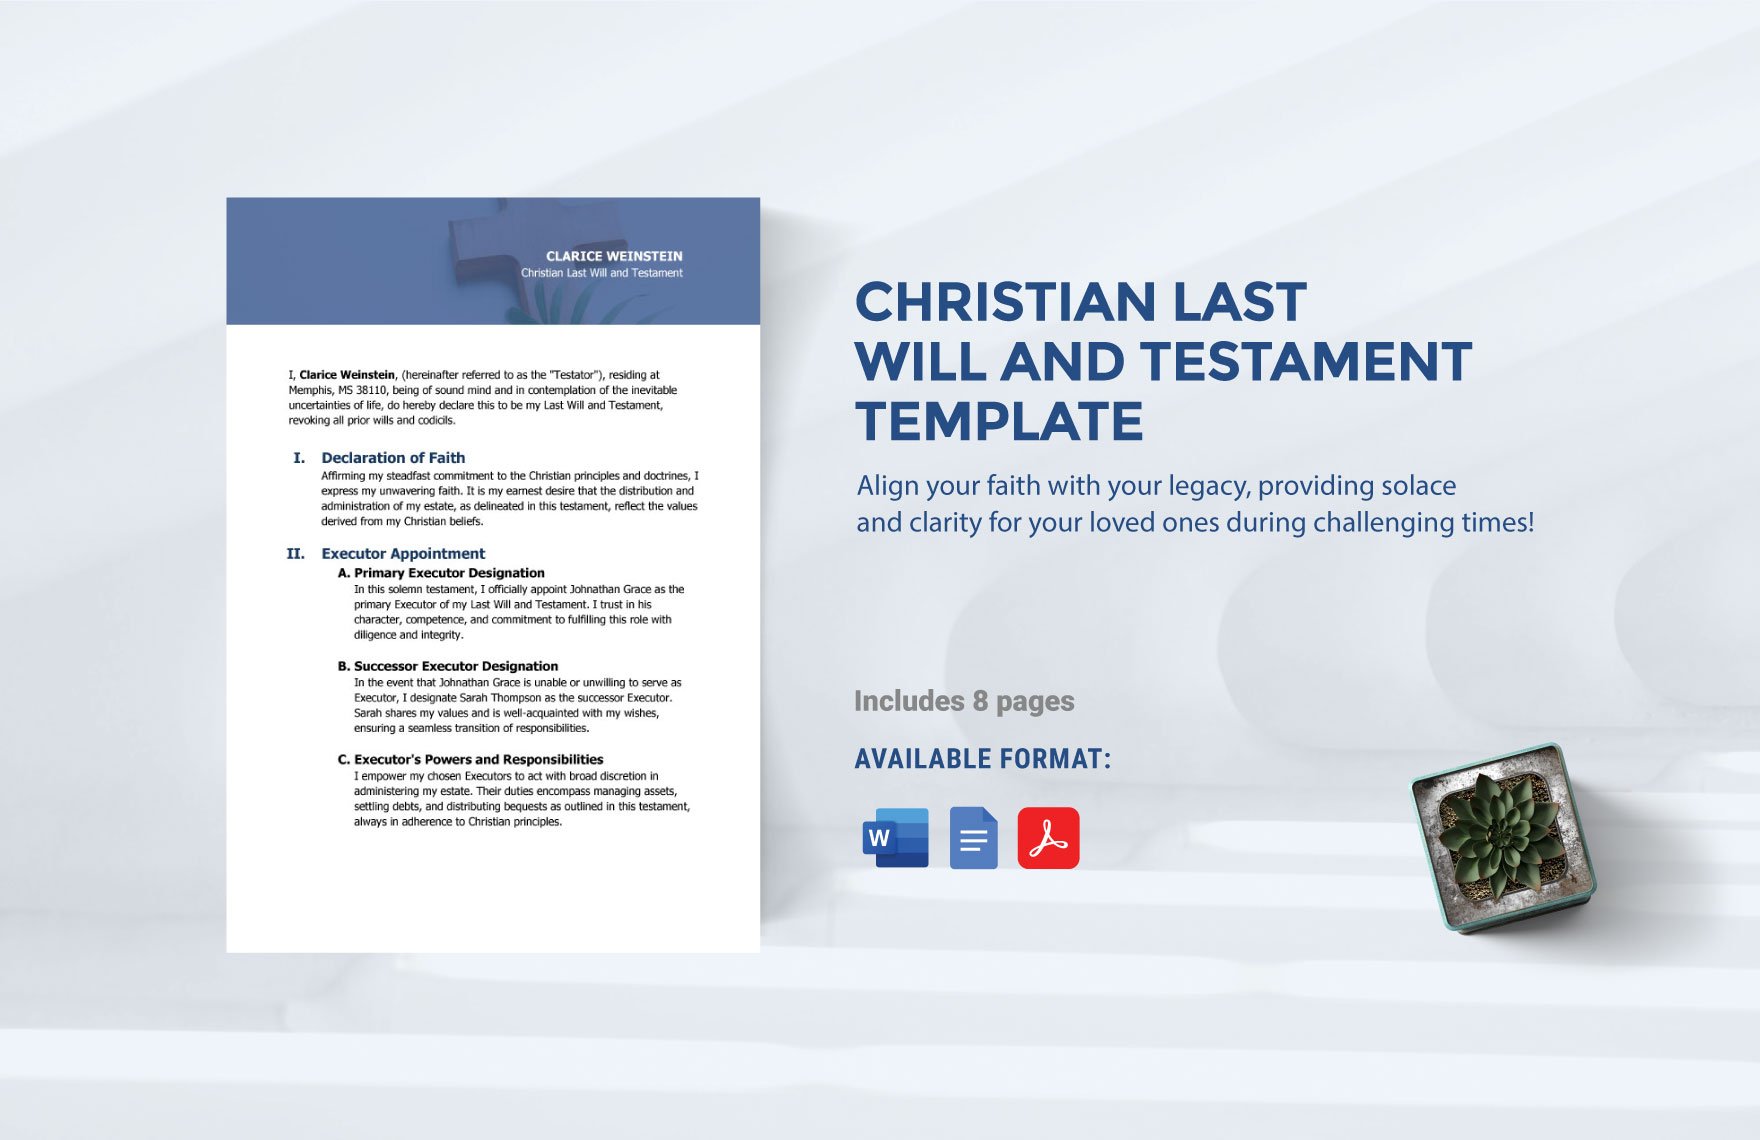 Christian Last Will and Testament Template